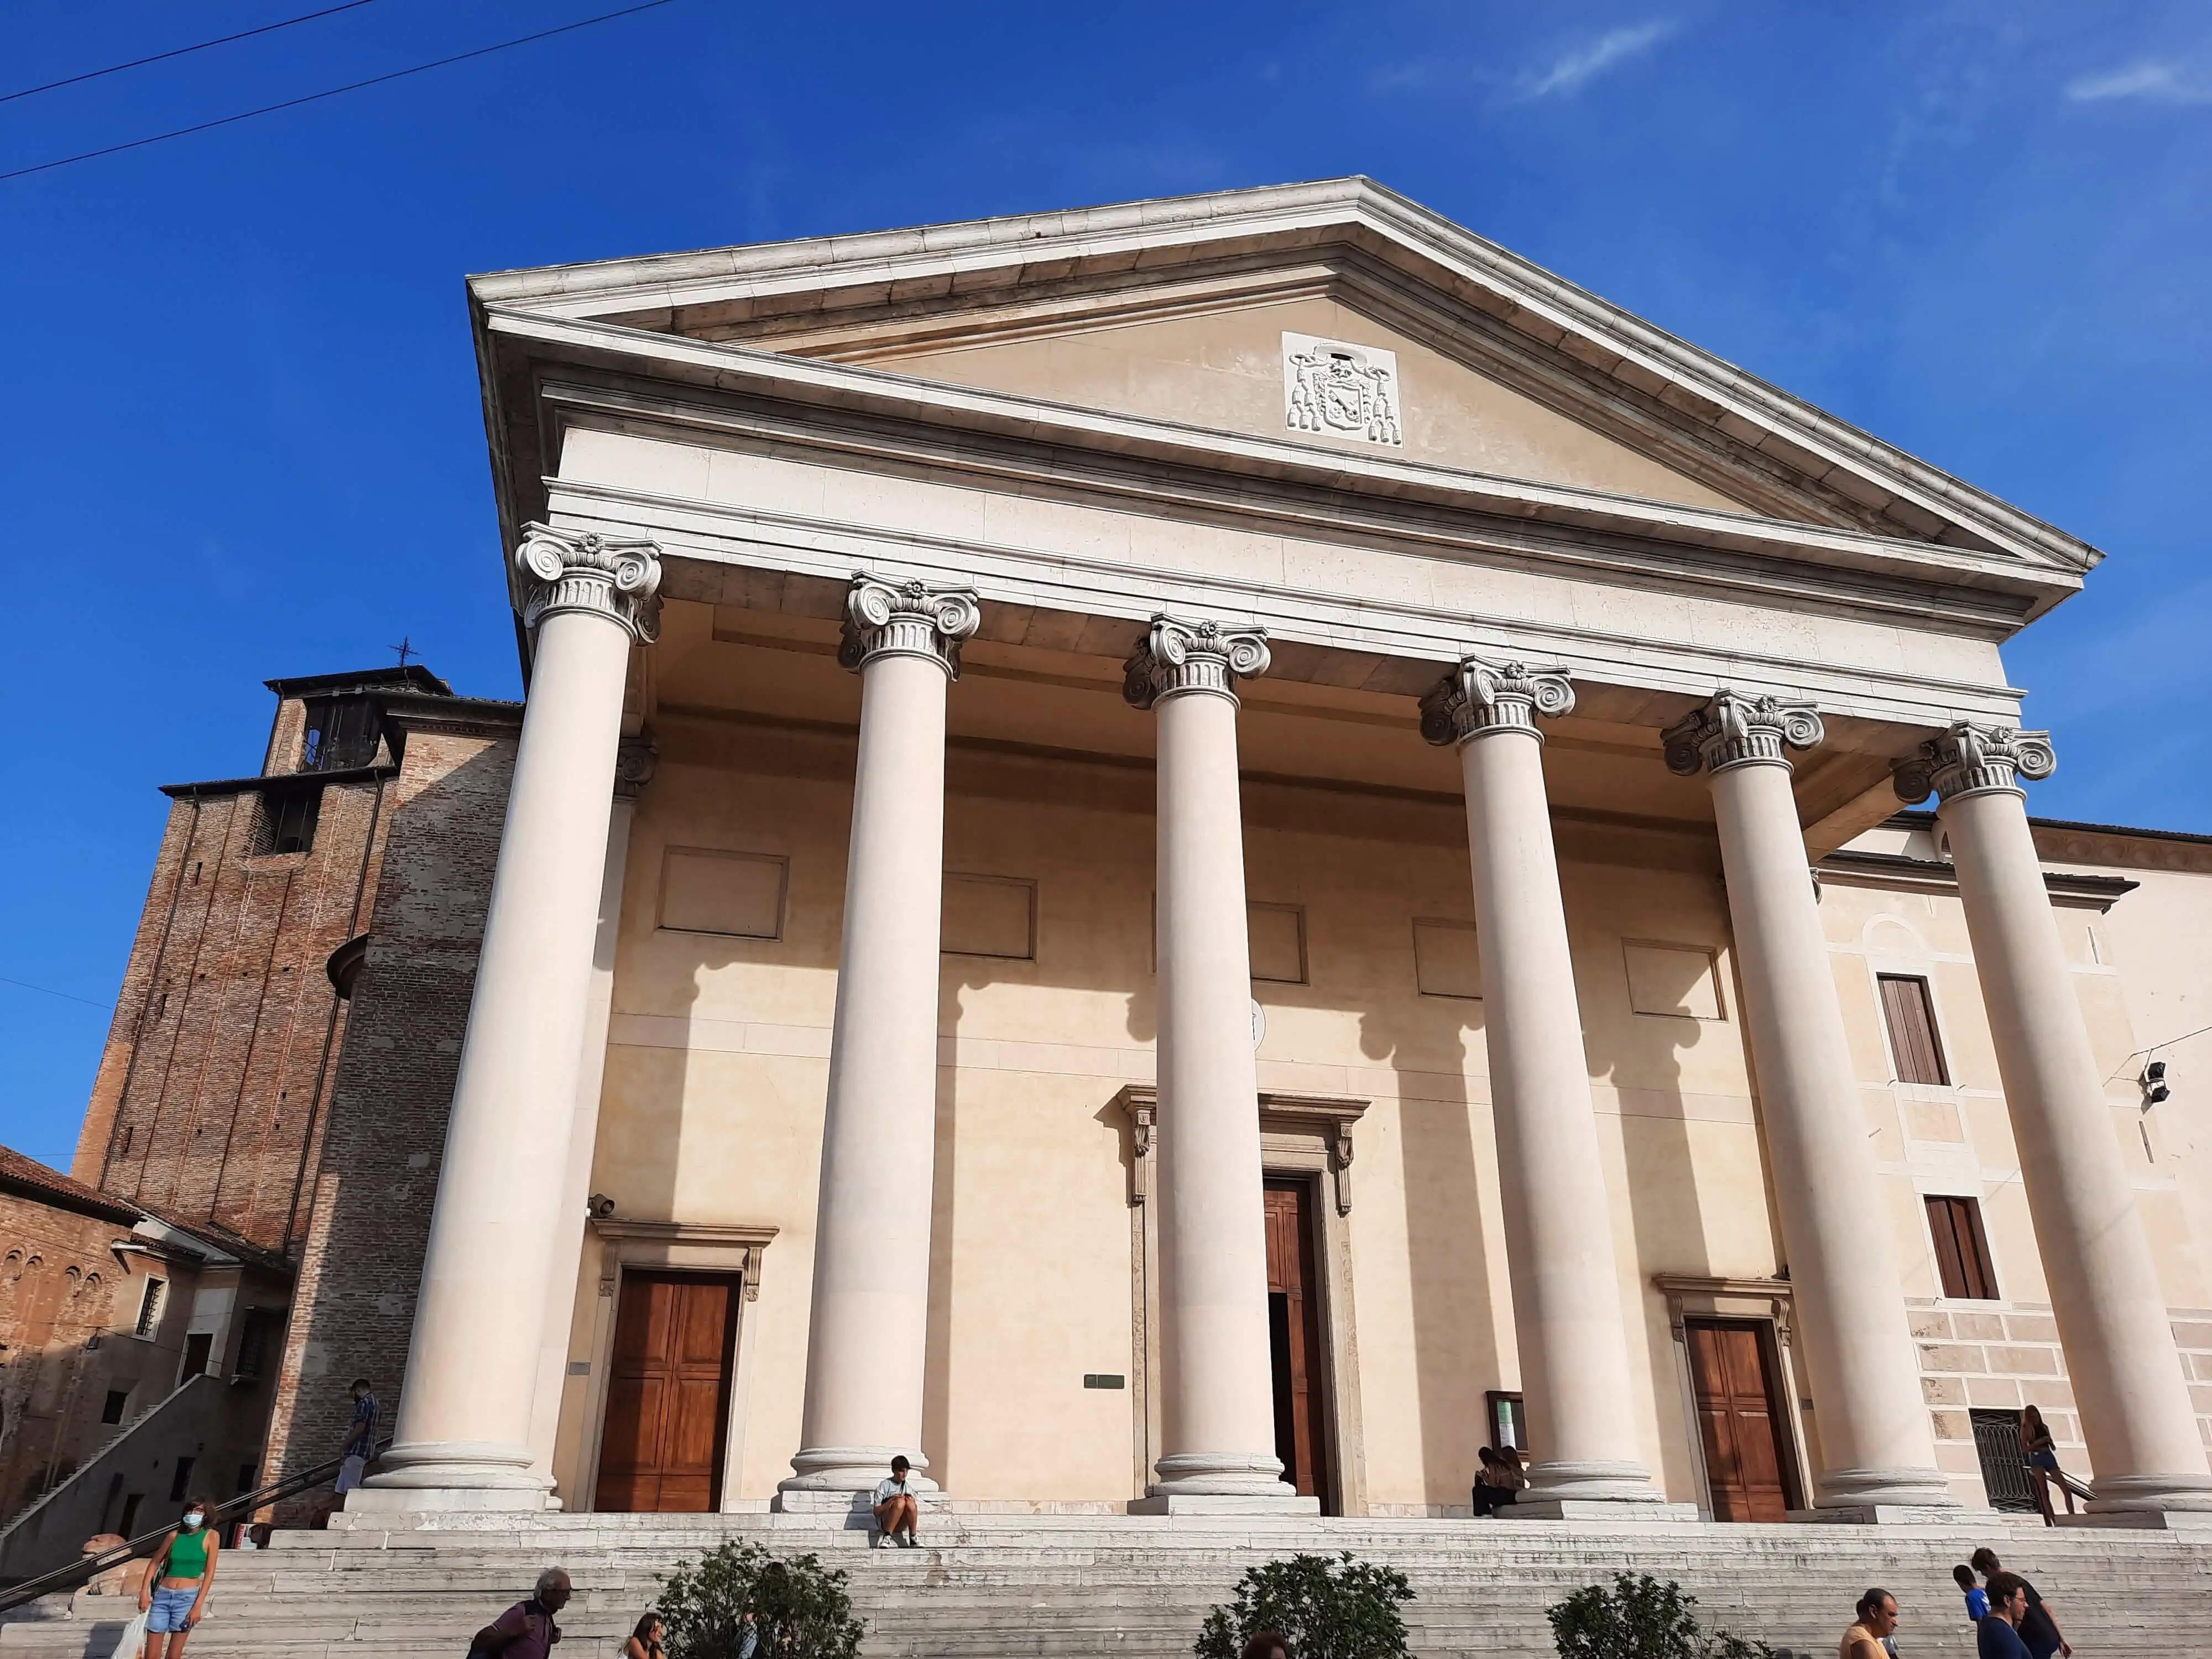 A CHurch with a greek temple-style facade